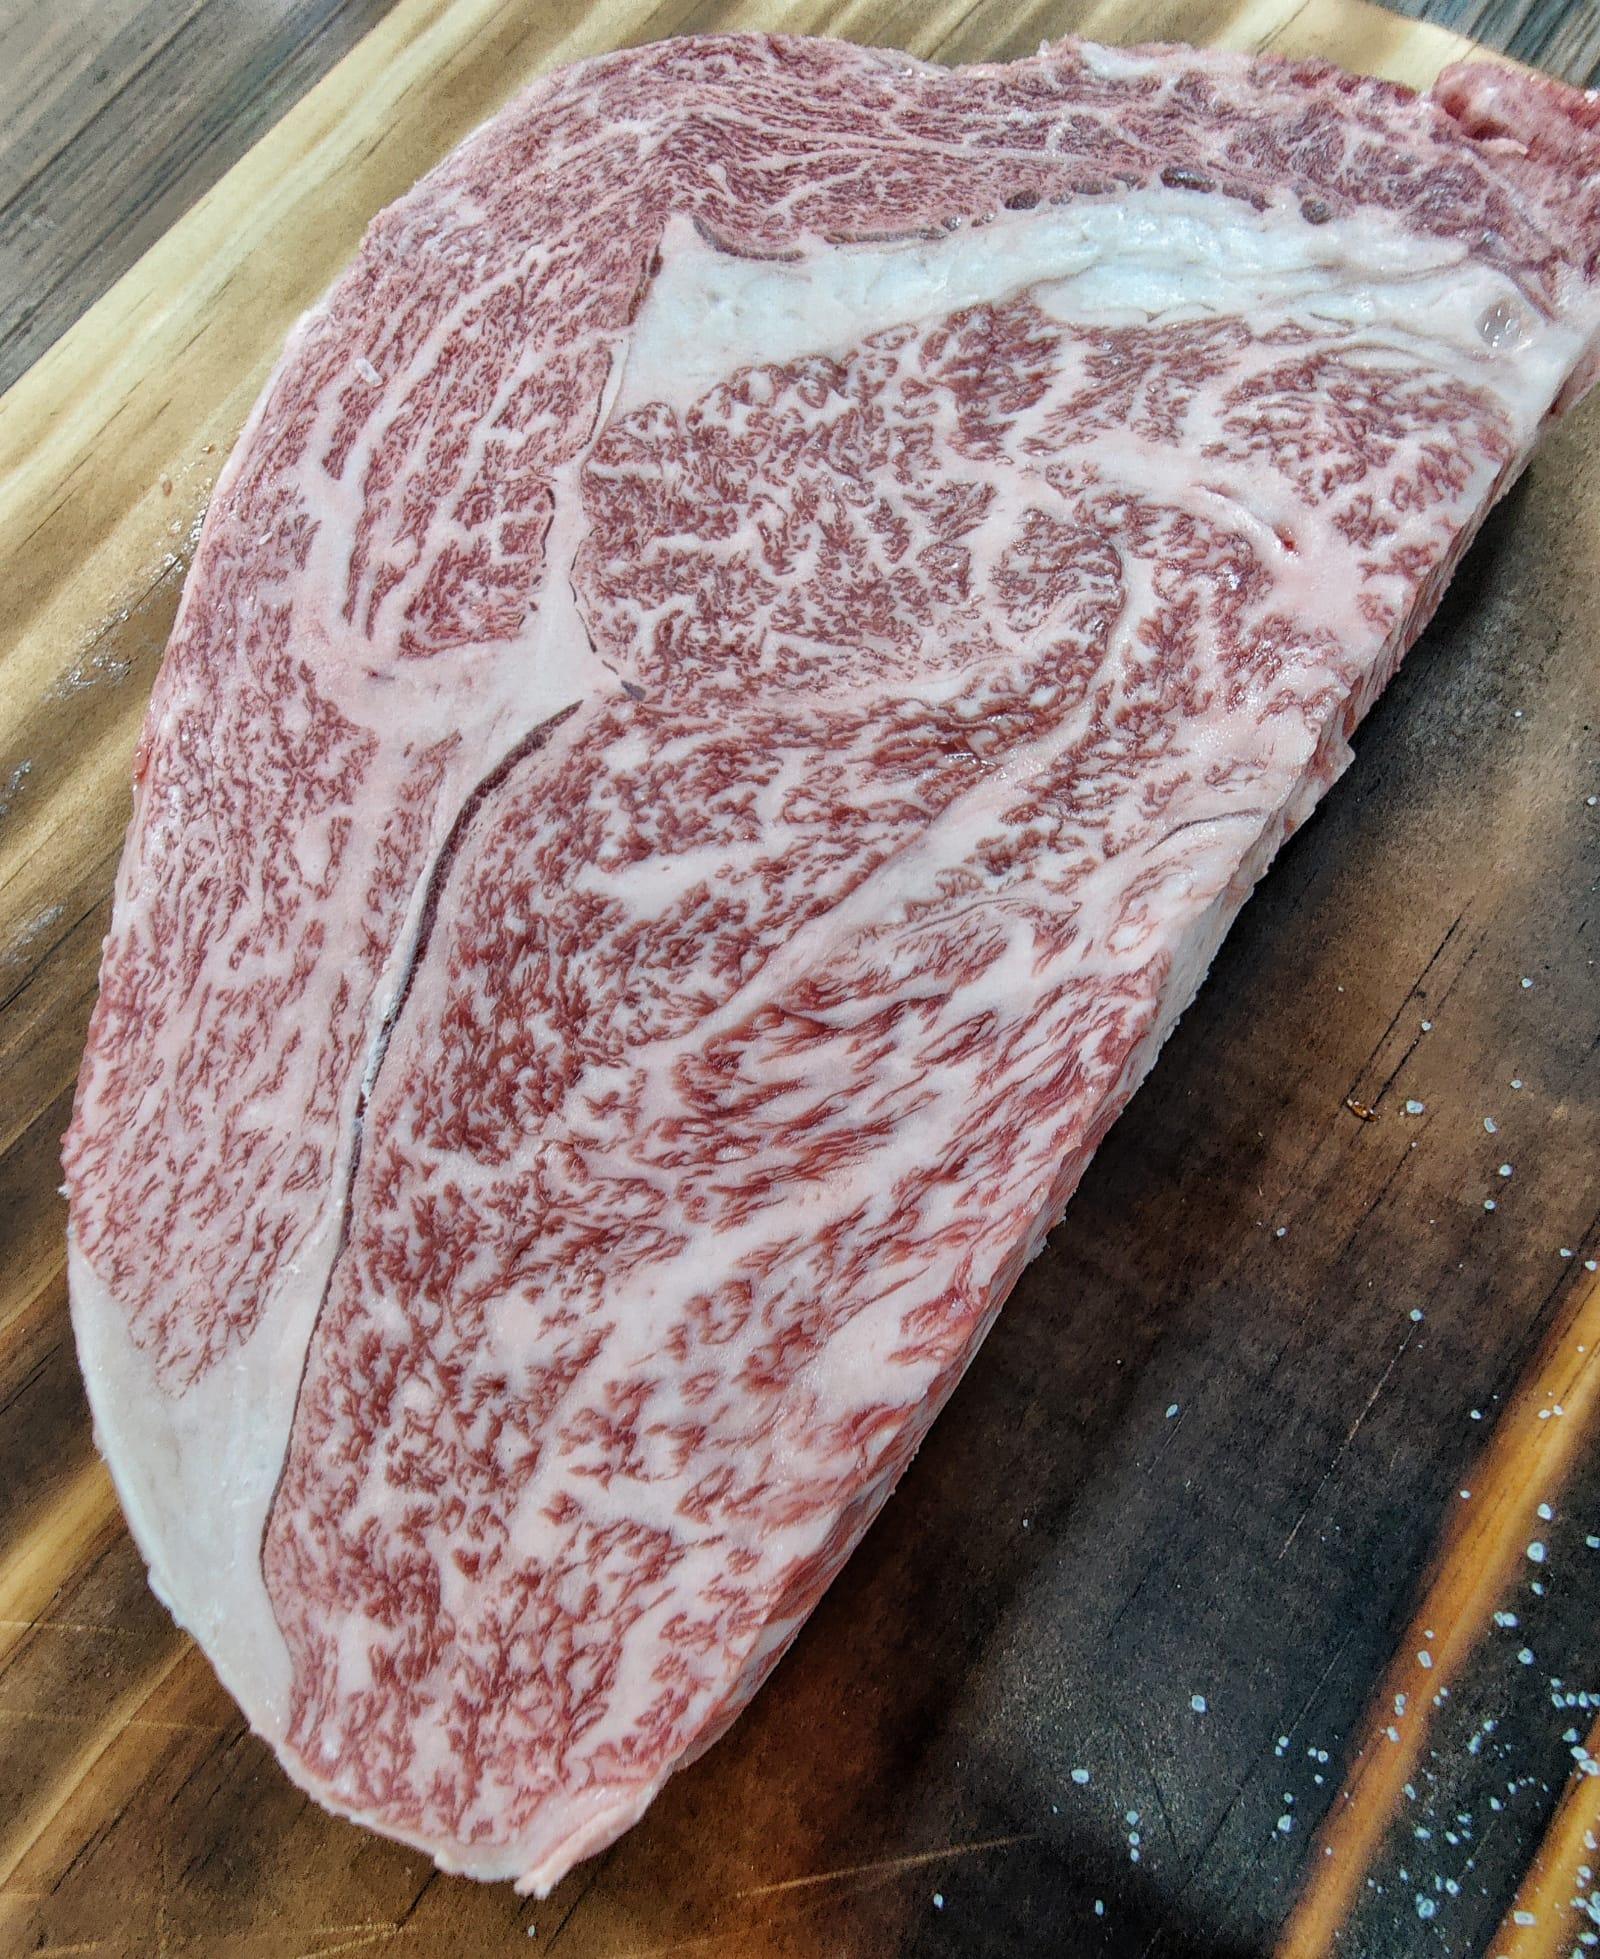 If you want to try Japanese A5 wagyu, for the same price as